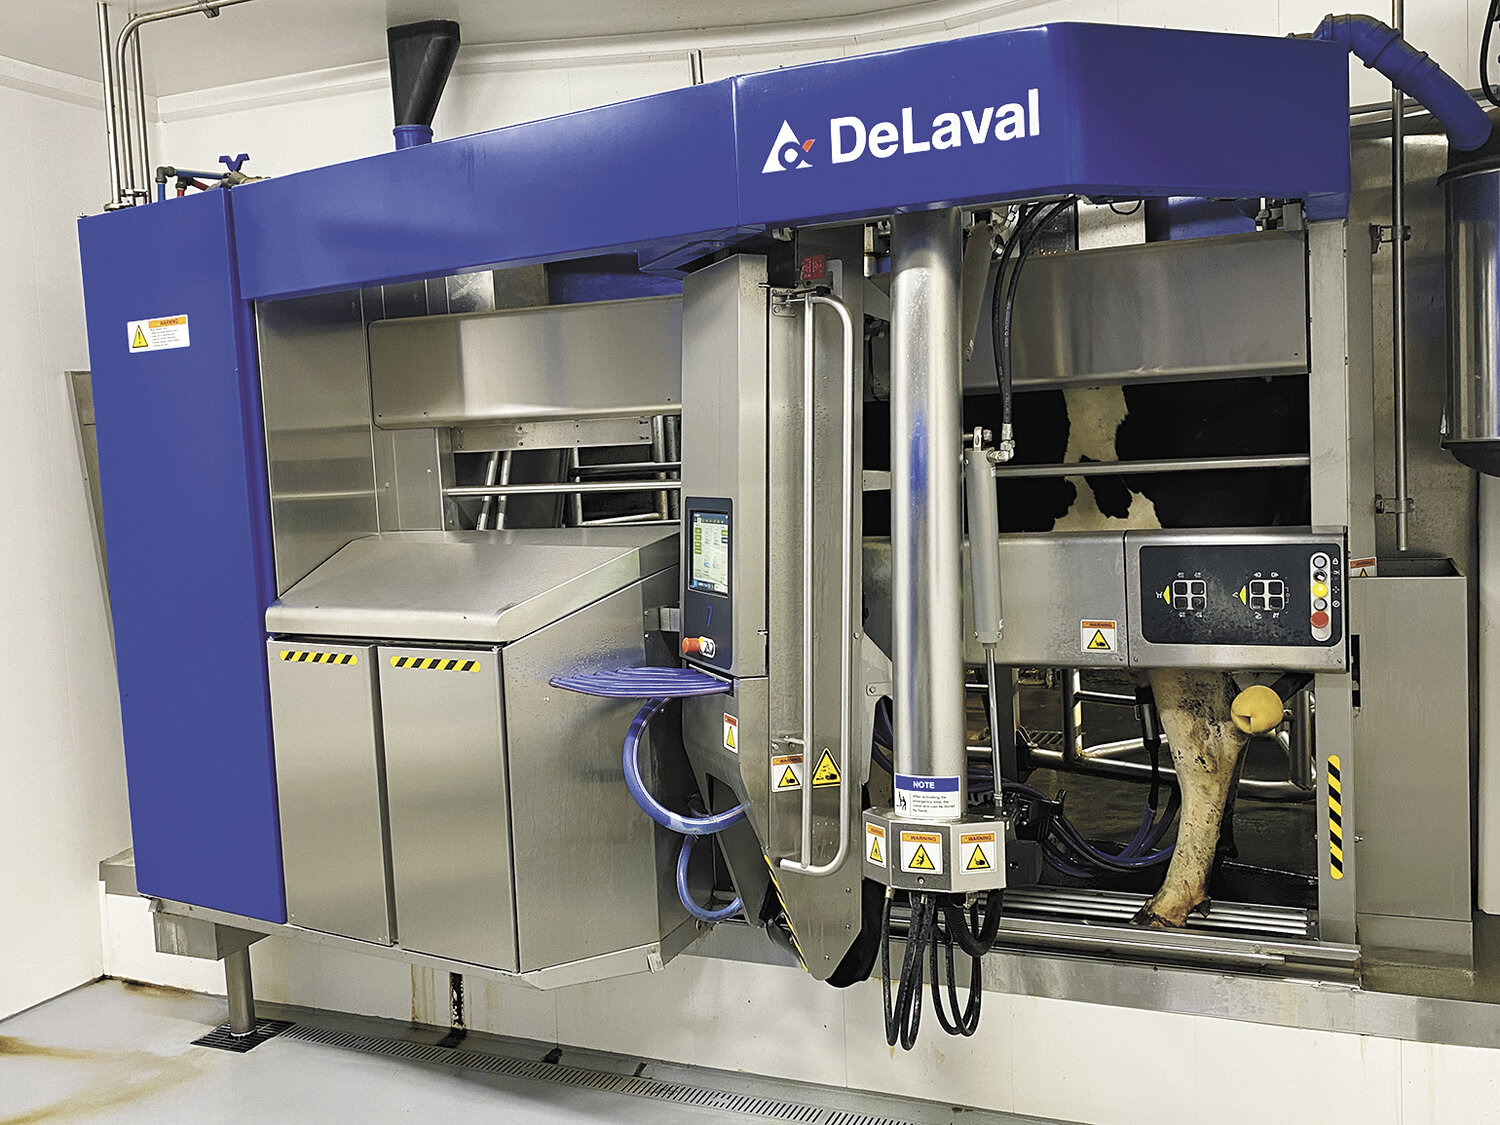 A cow gets milked Nov. 3 by one of the 20 DeLaval robots at Mitch Moorlag’s dairy near Lynden, Washington. Cows average 3.2 milkings per day, and Moorlag has seen a 4% increase in milk production with cows sustaining peak milk longer.